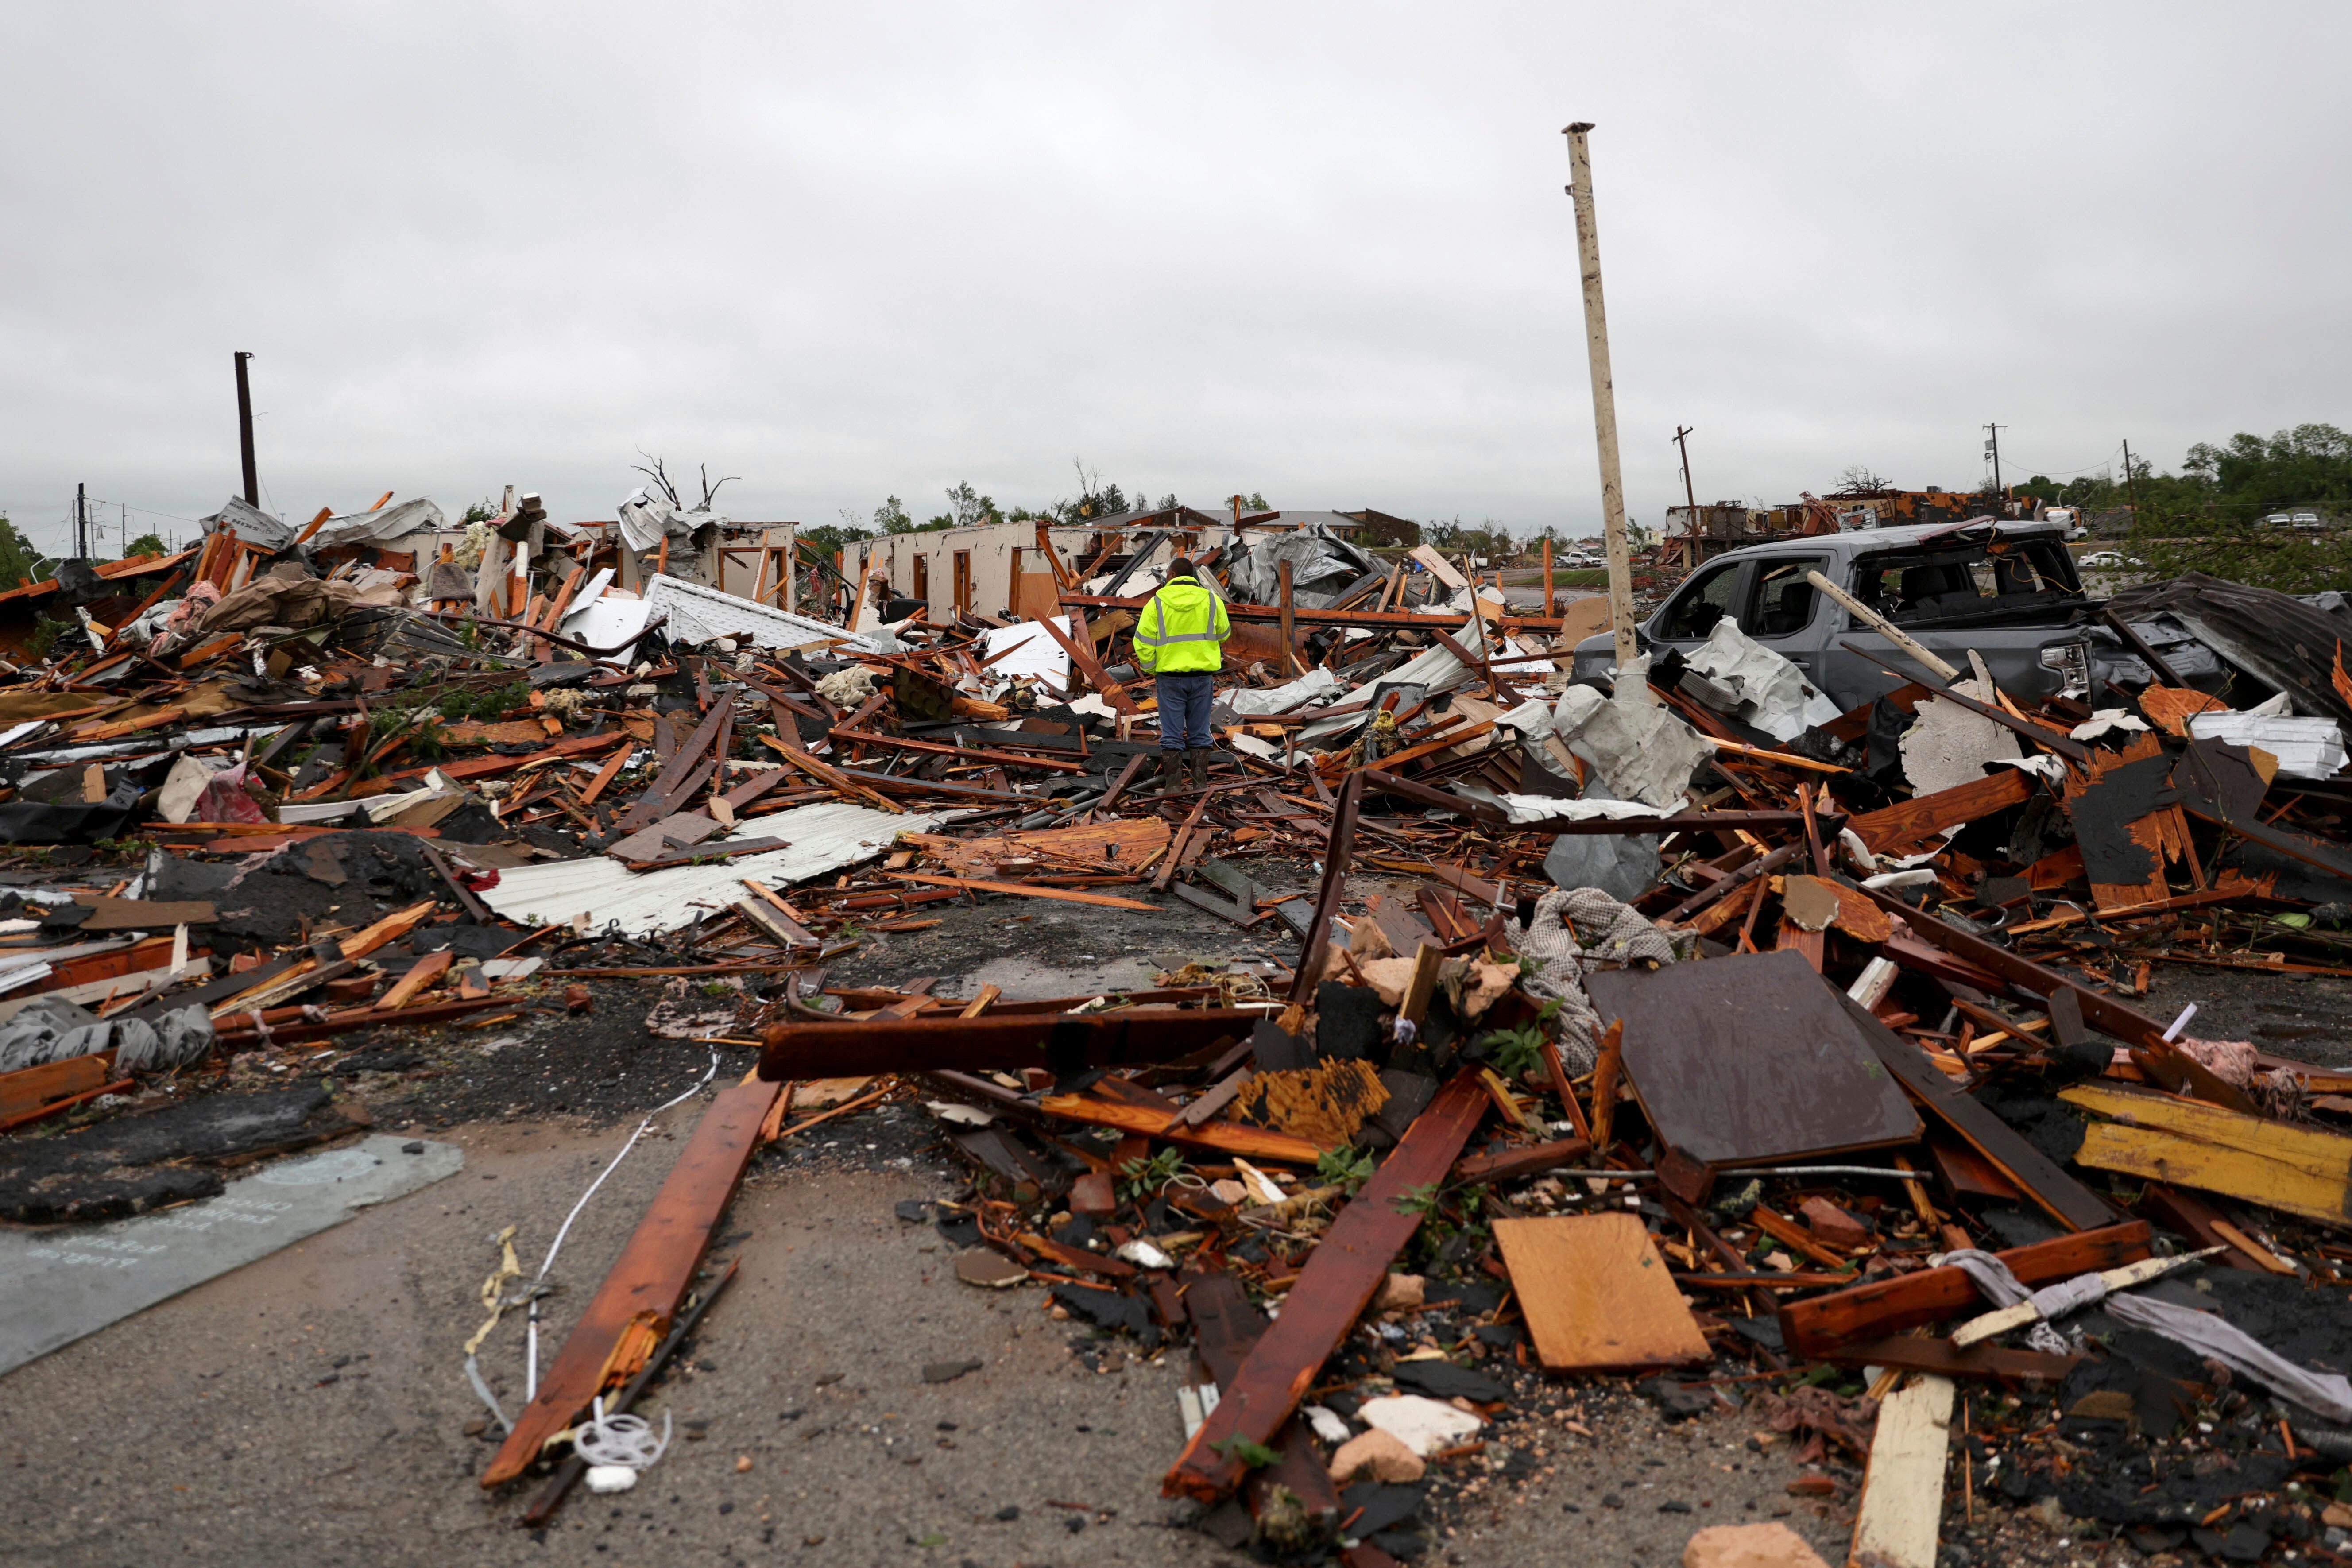 A man surveys storm damage in Sulphur, Oklahoma on Sunday. Governor Kevin Stitt said the town sustained the worst damage he has seen in his career